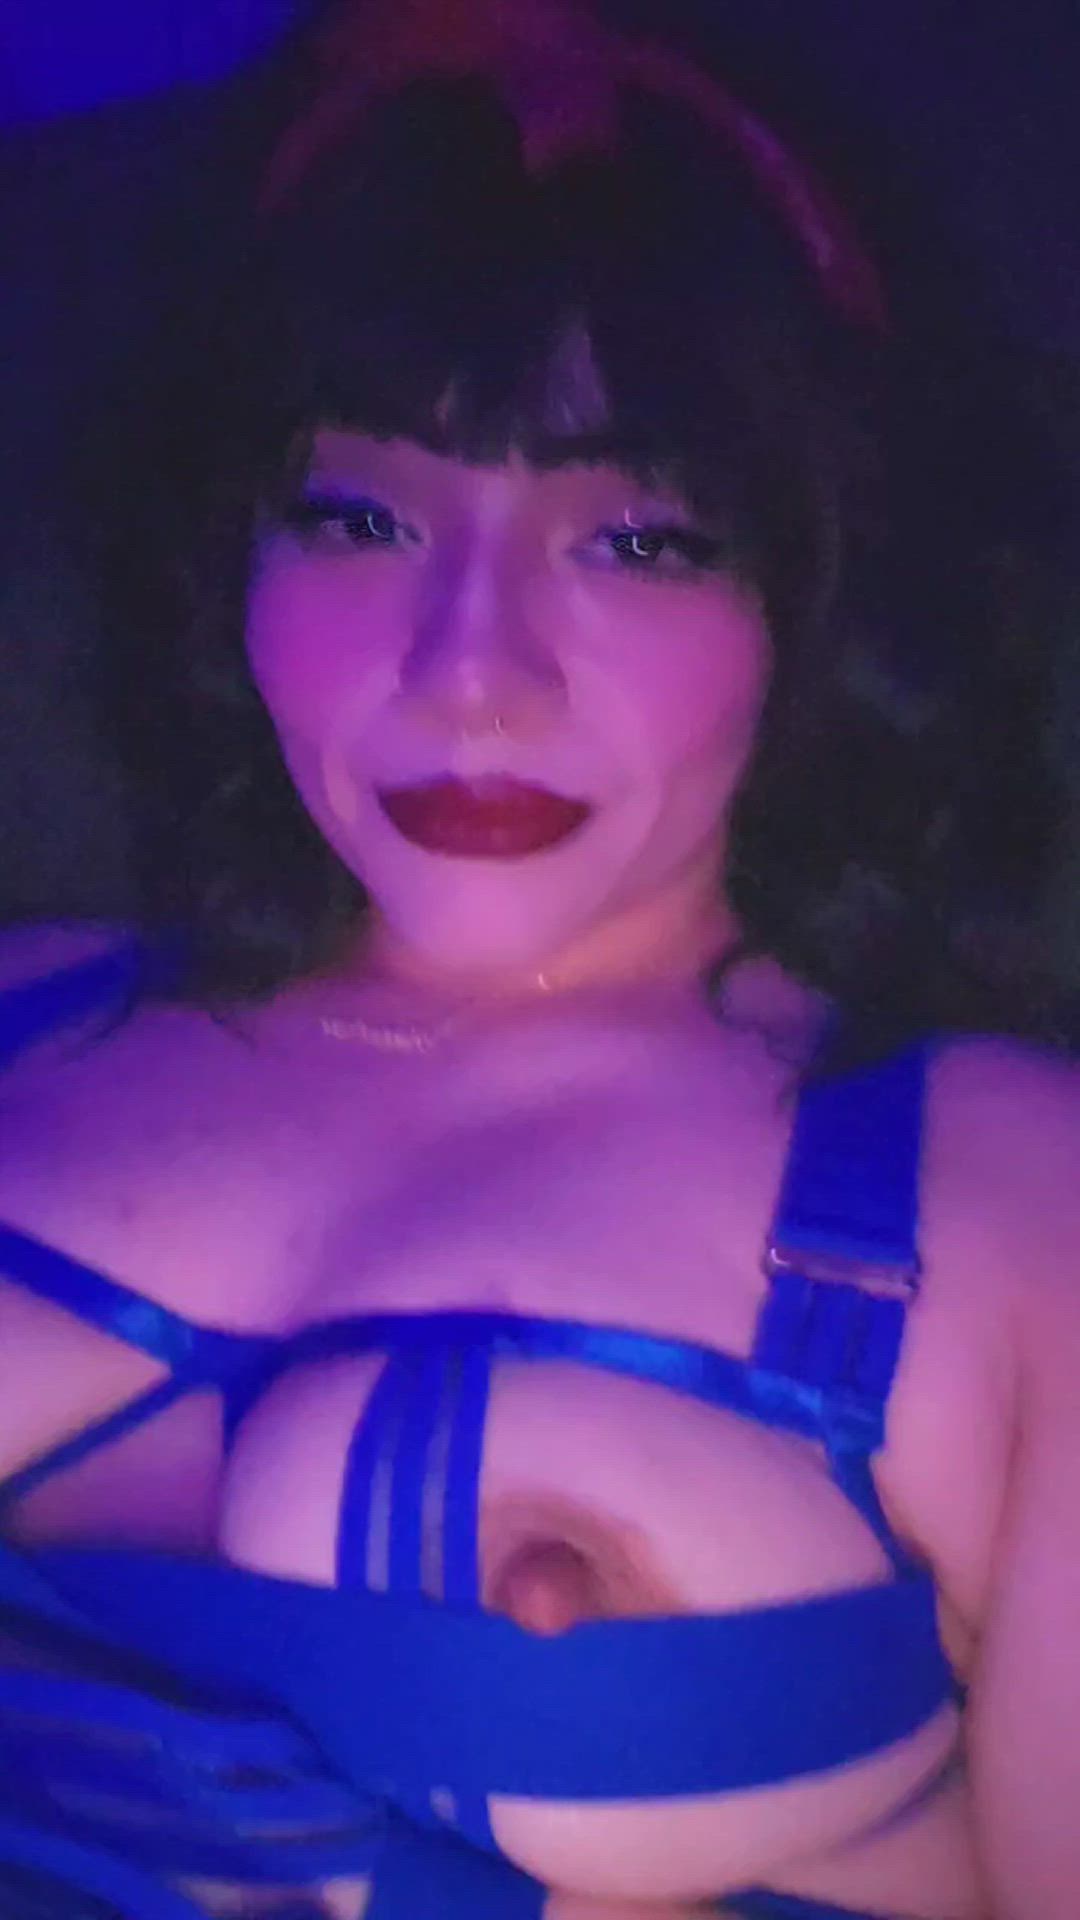 Amateur porn video with onlyfans model pixarmommthicc669 <strong>@tht1grrlmaxxx669</strong>